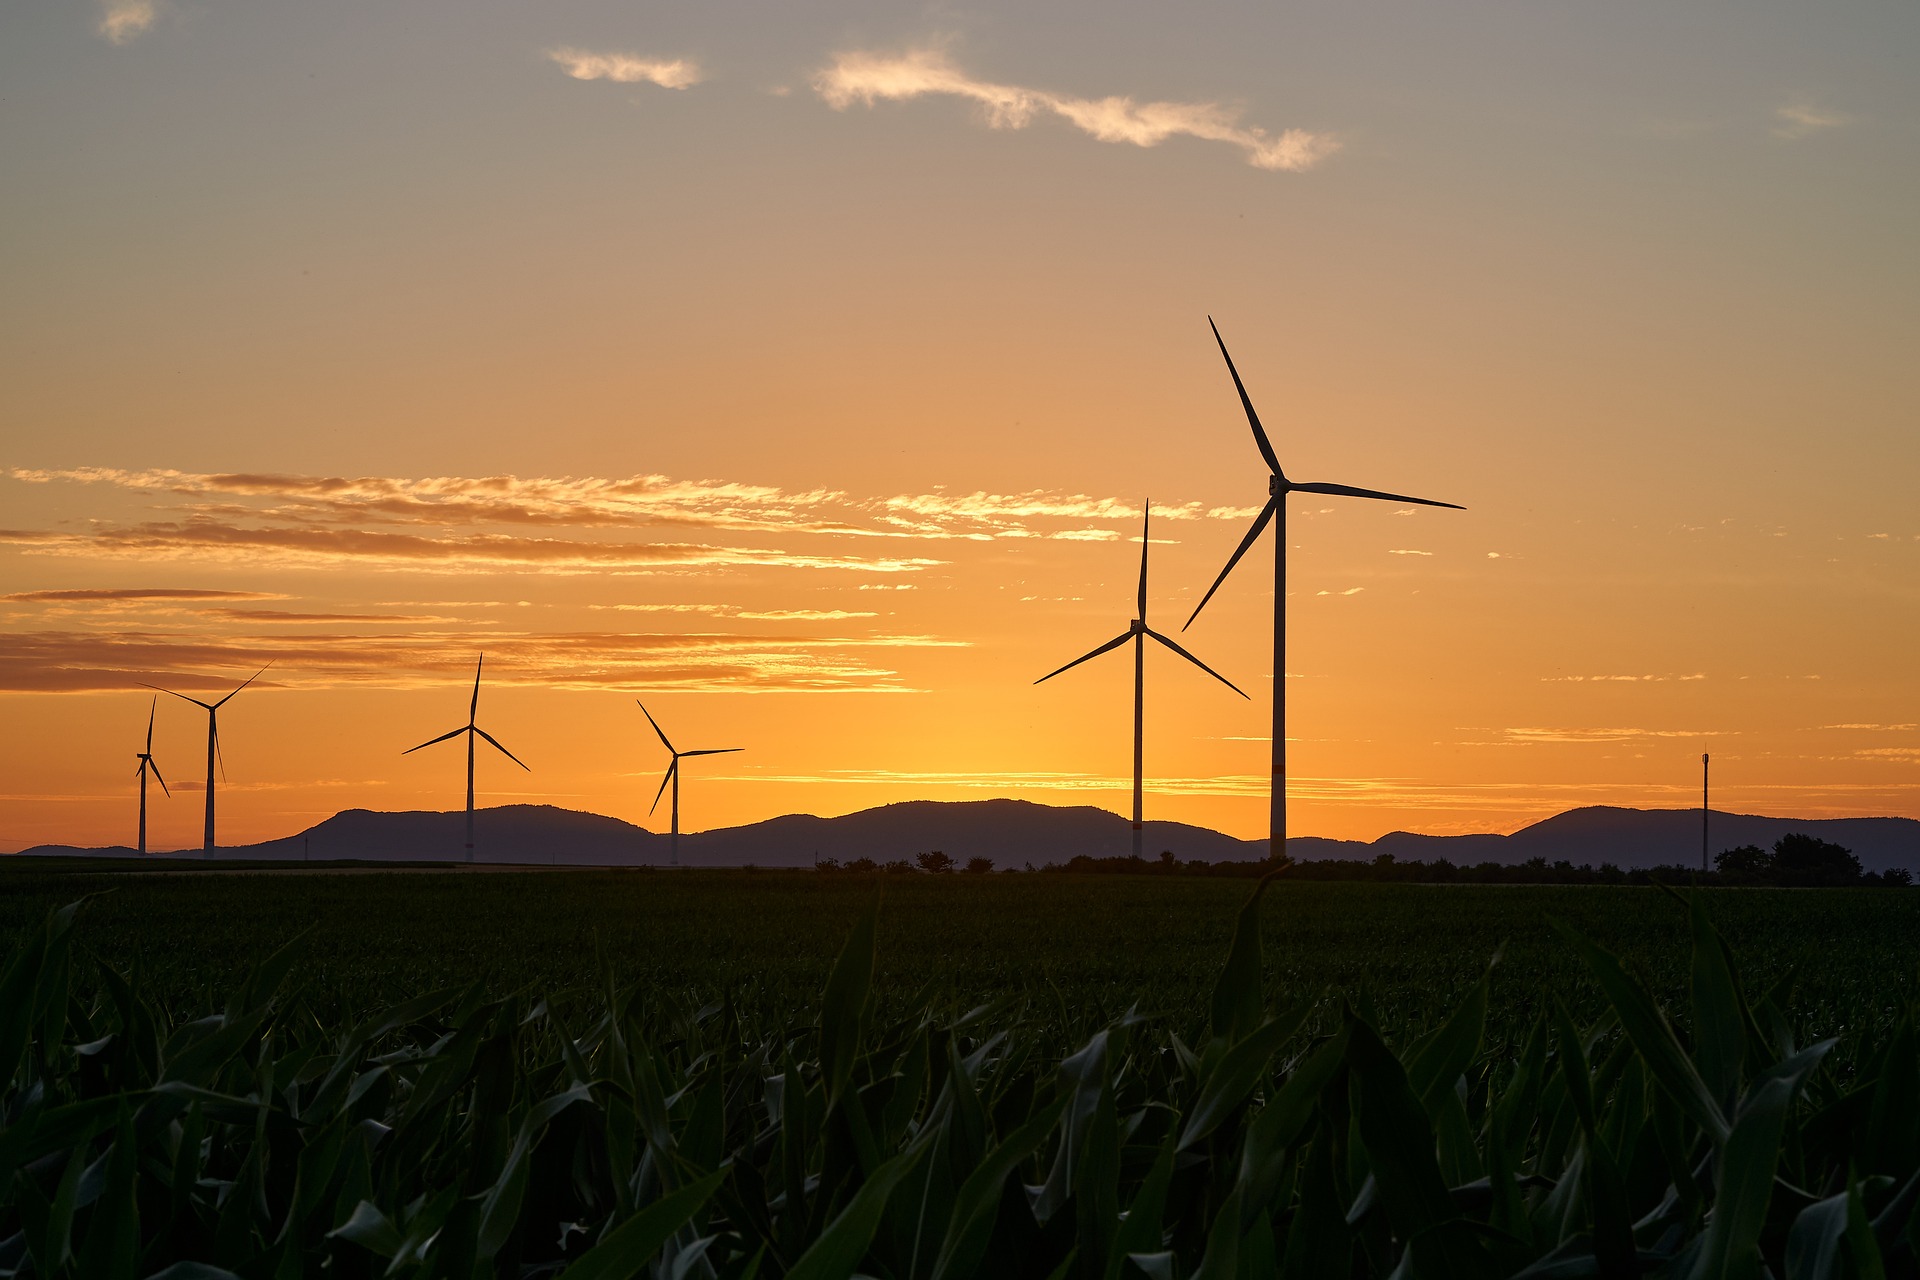 MEMBER NEWS: THREE60 Energy invests in wind through strategic acquisition